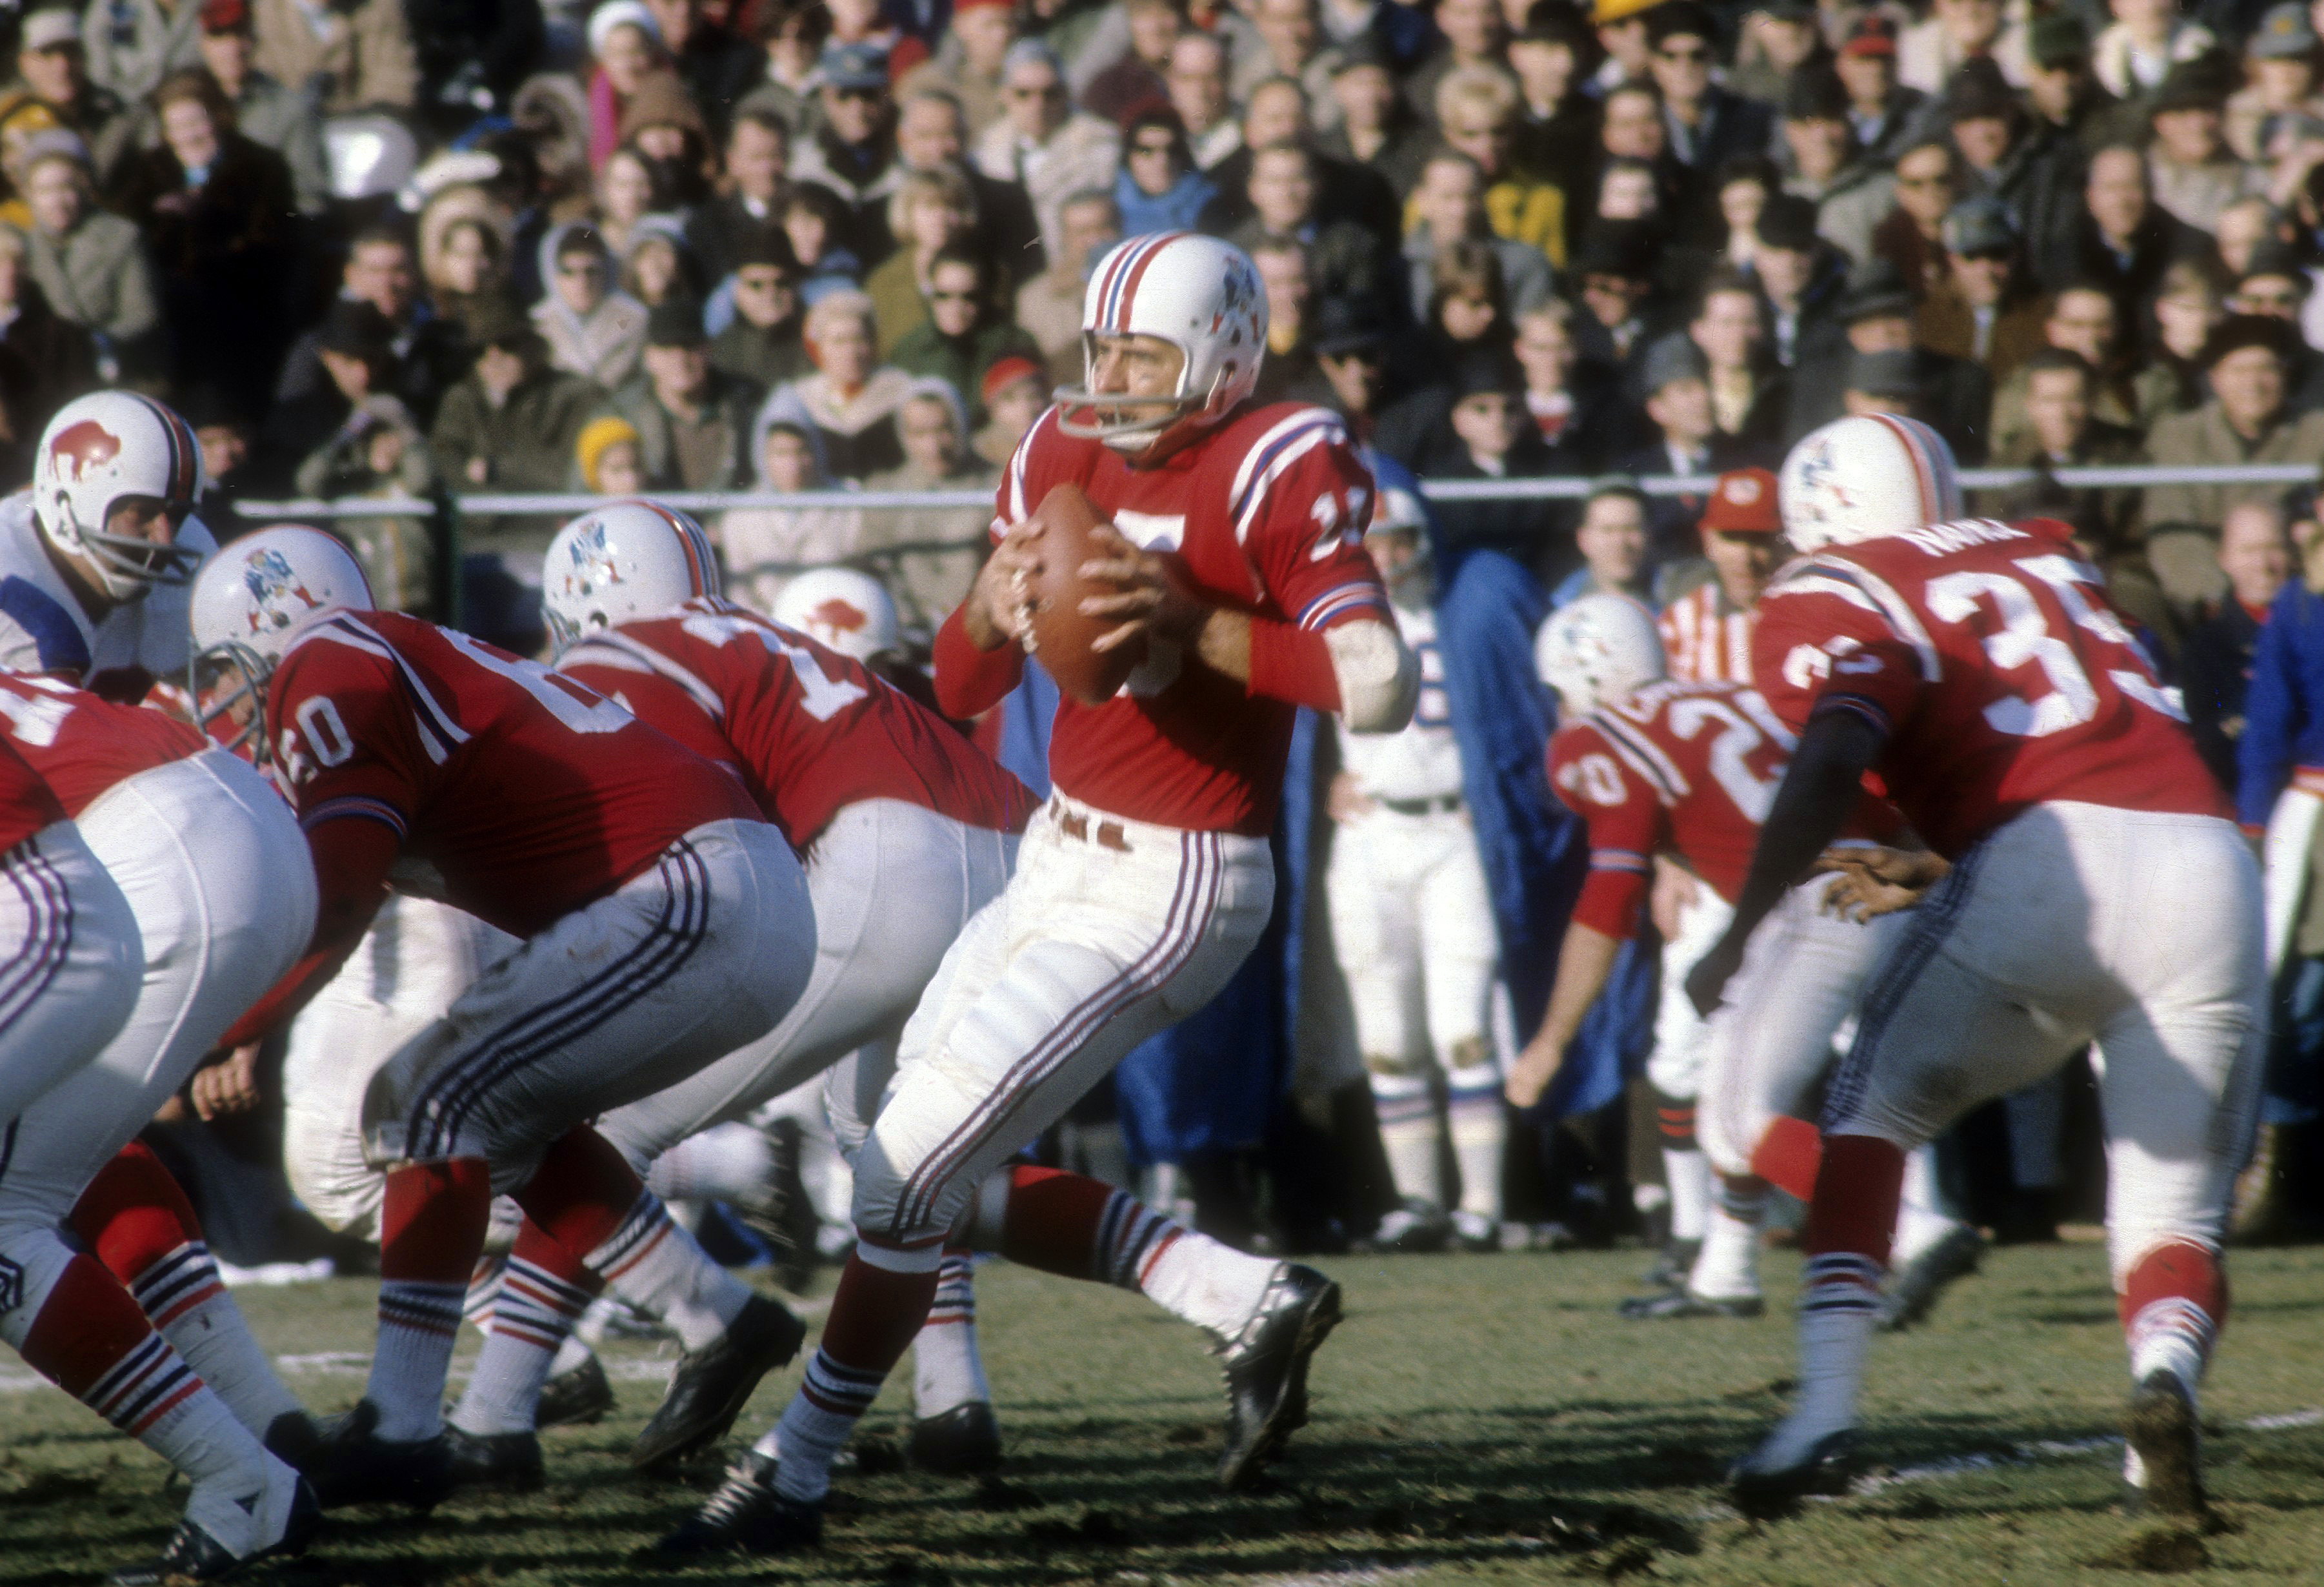 The Patriots and Bills last faced each other in a playoff game in 1963